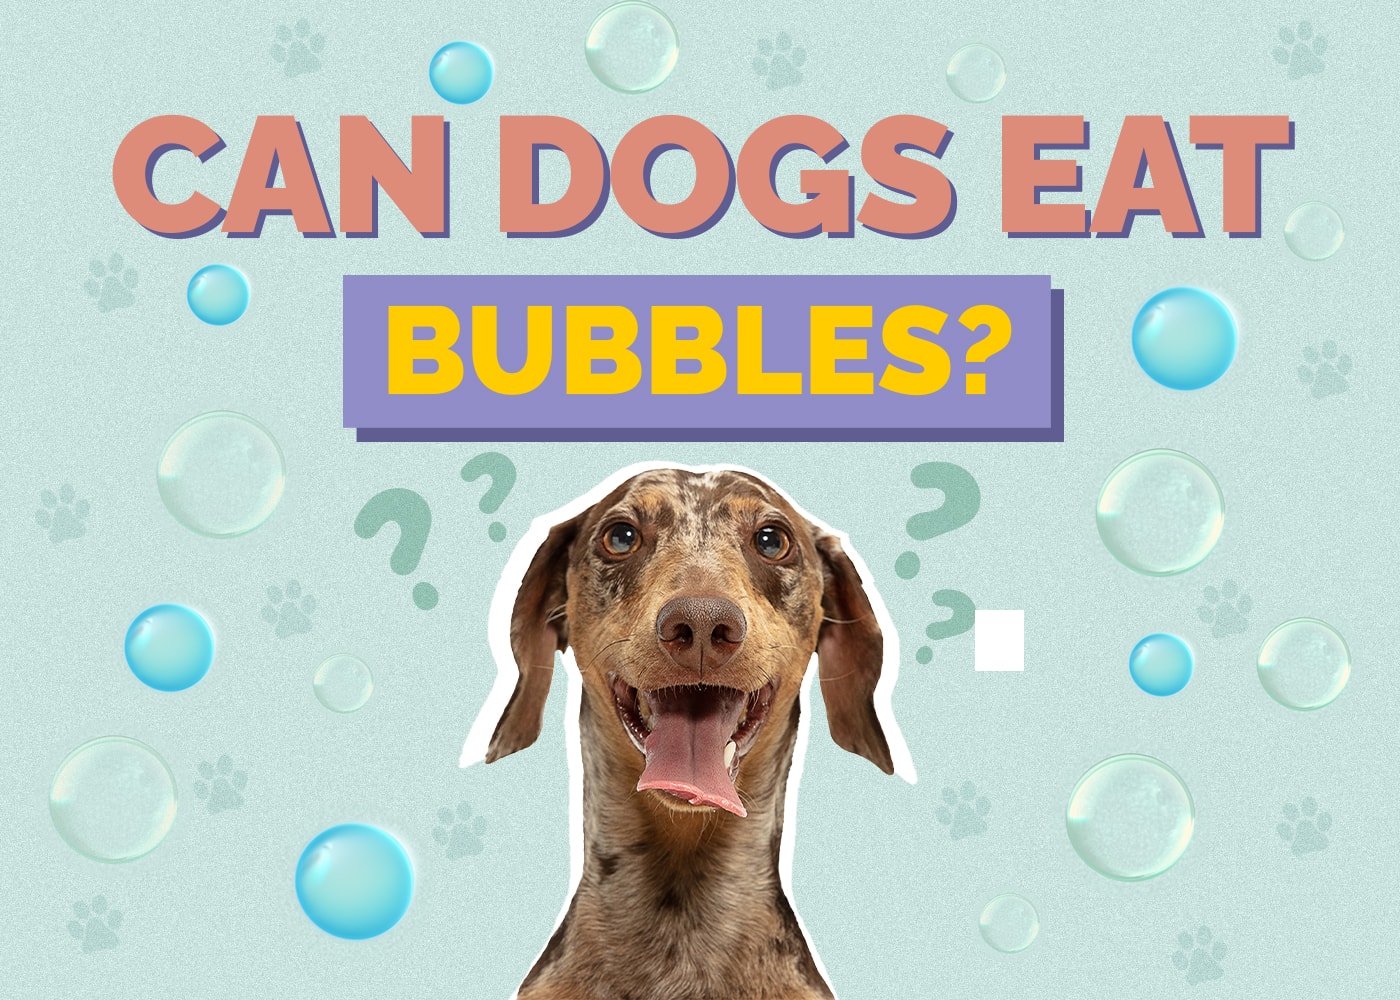 Can Dog Eat bubbles